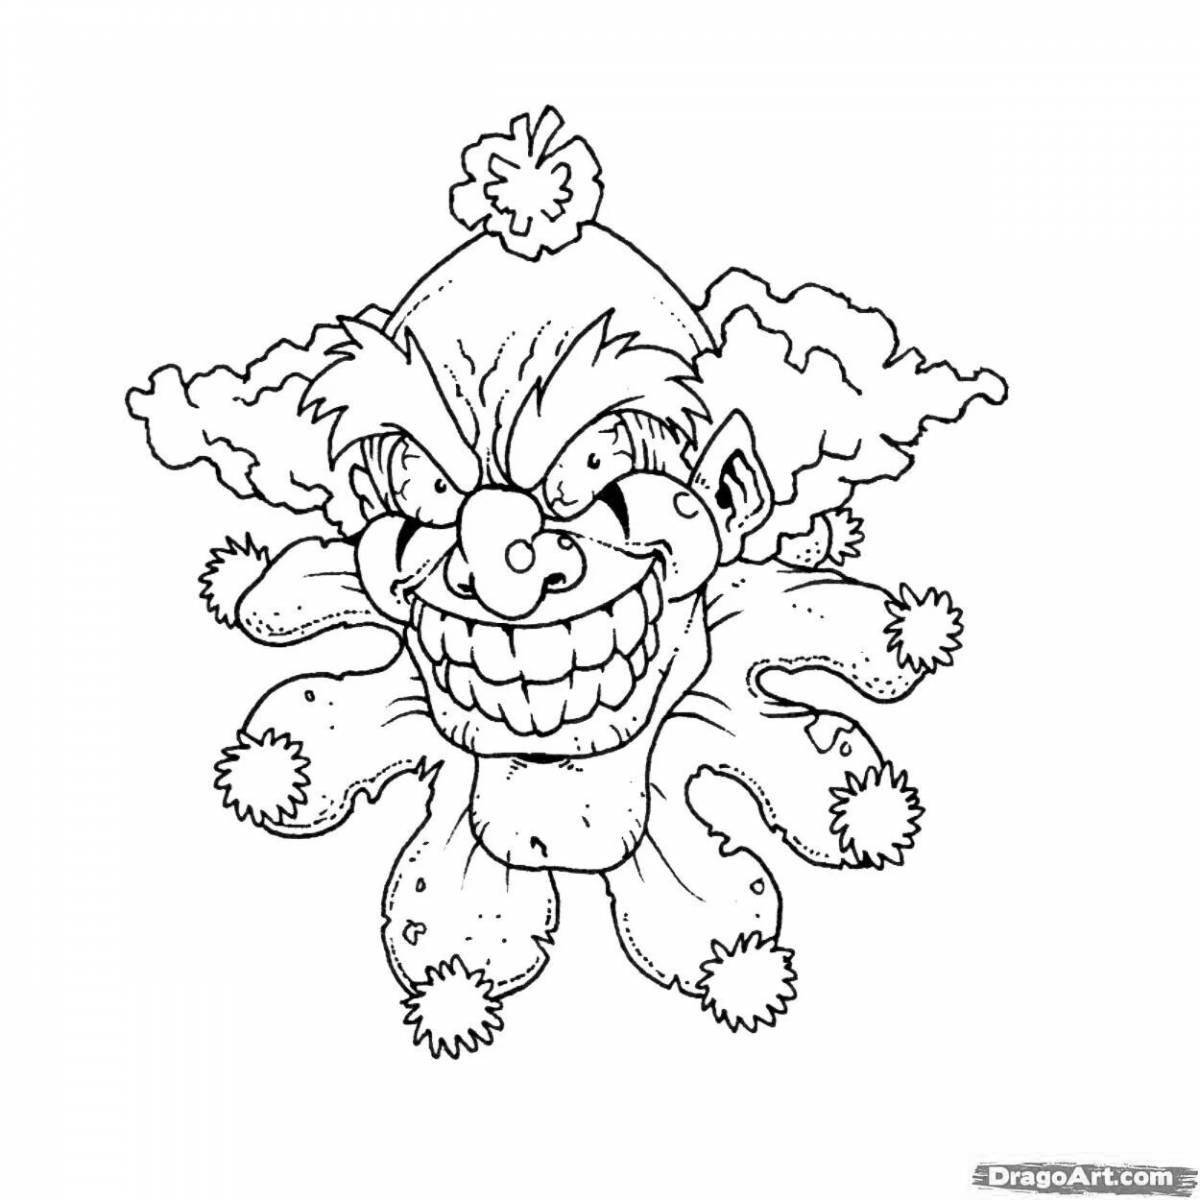 Unappetizing scary clown coloring book